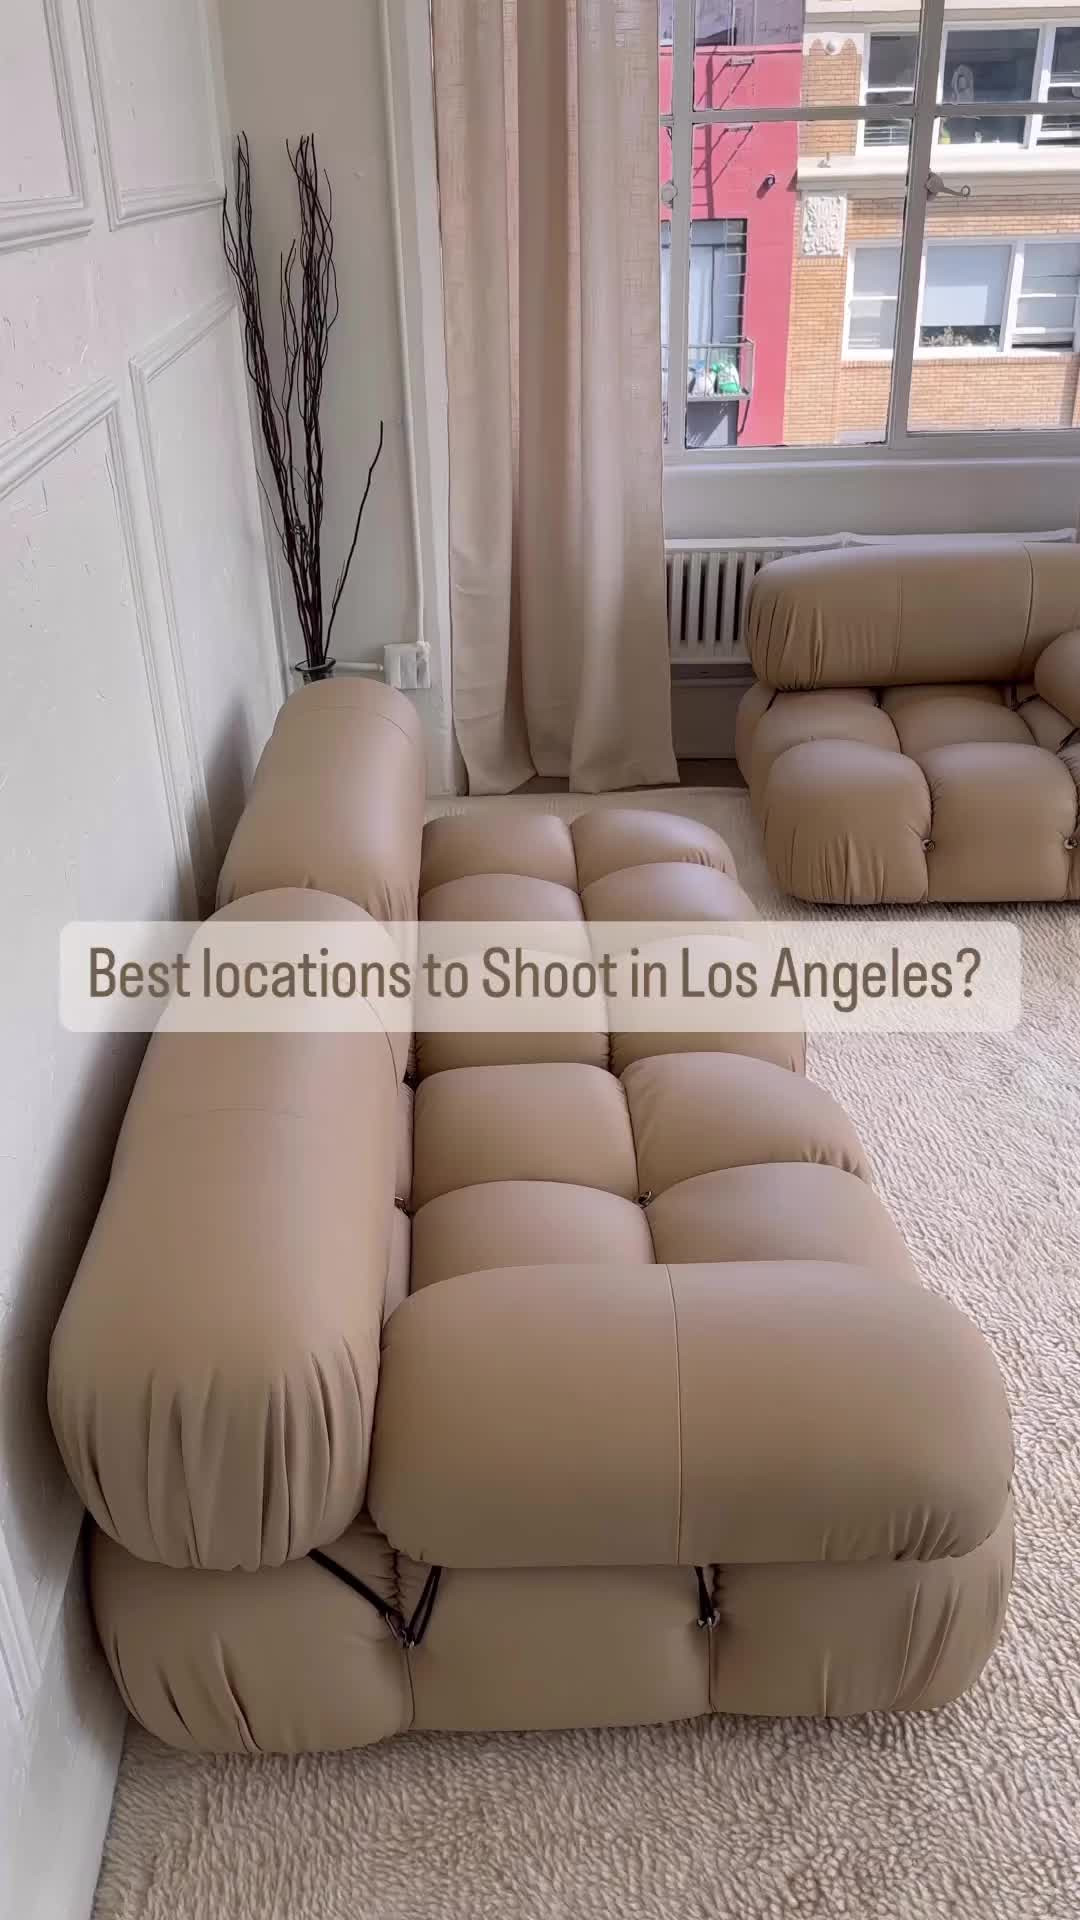 Best Photography Locations in Los Angeles. What would you wear at this location? #fyp #photography #losangeles #nickmarxx